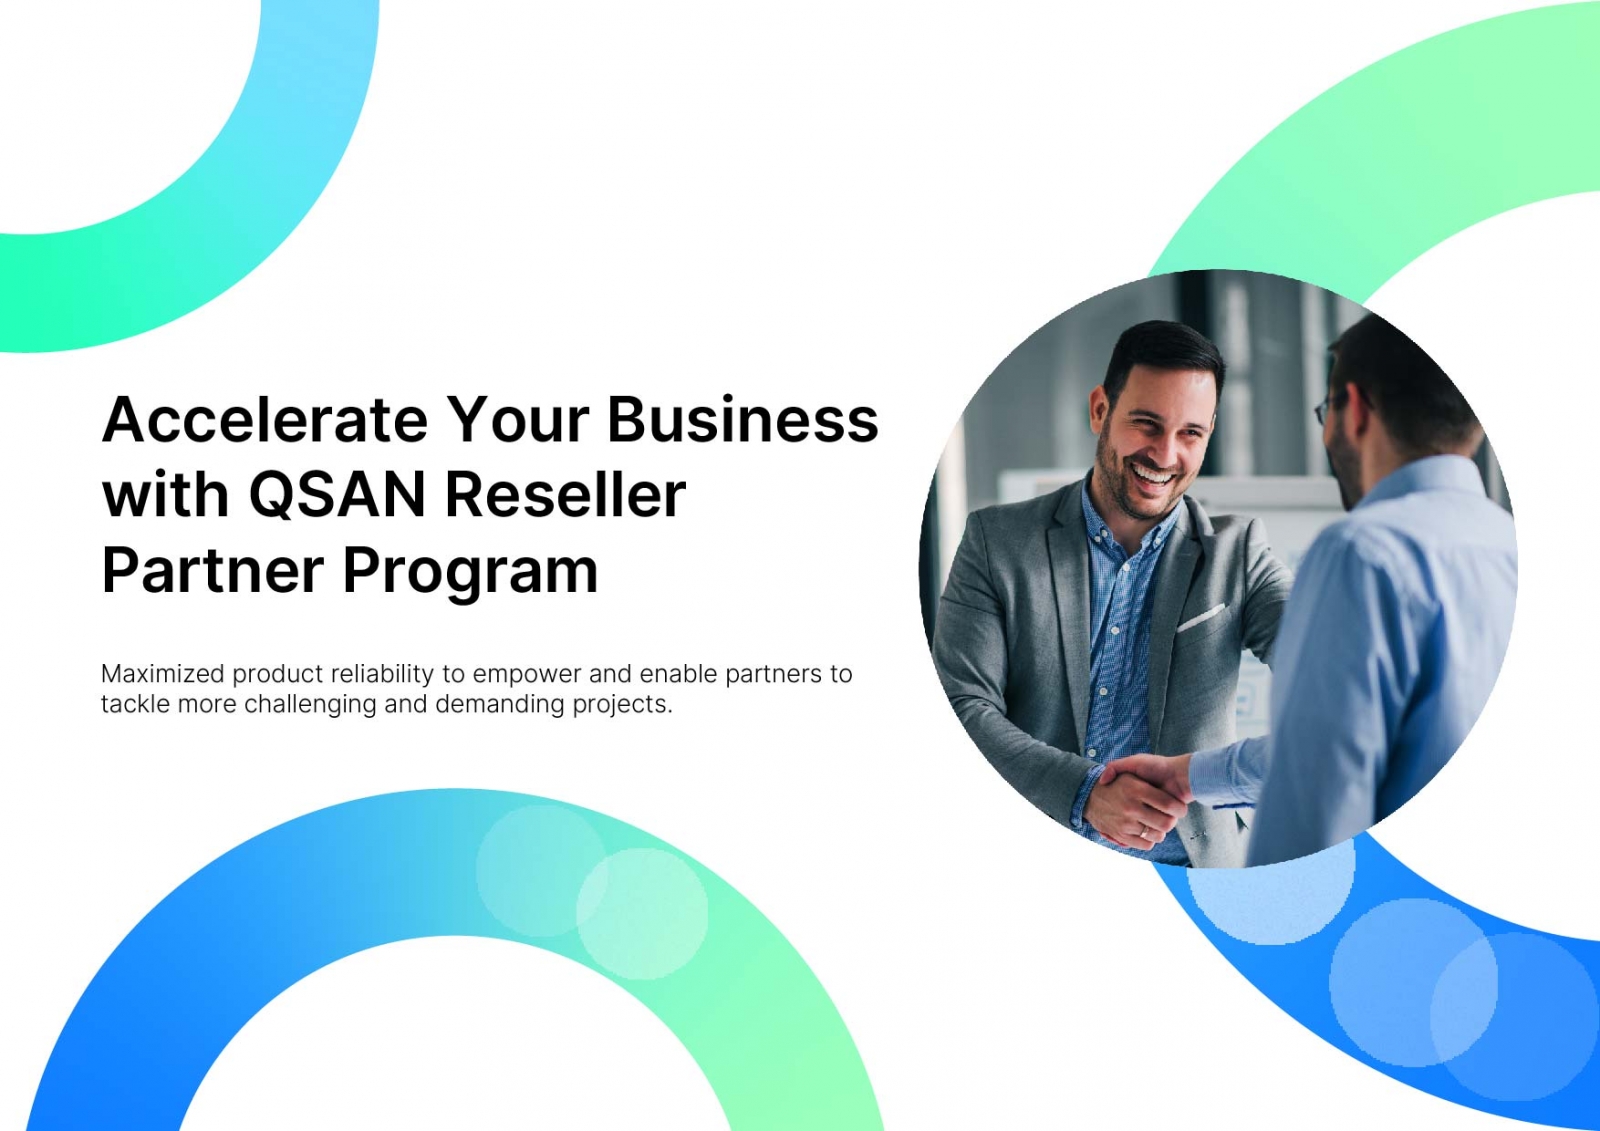 Higher Reliability, More Service Options, More Exclusive Benefits in QSAN 2024 Reseller Partner Program